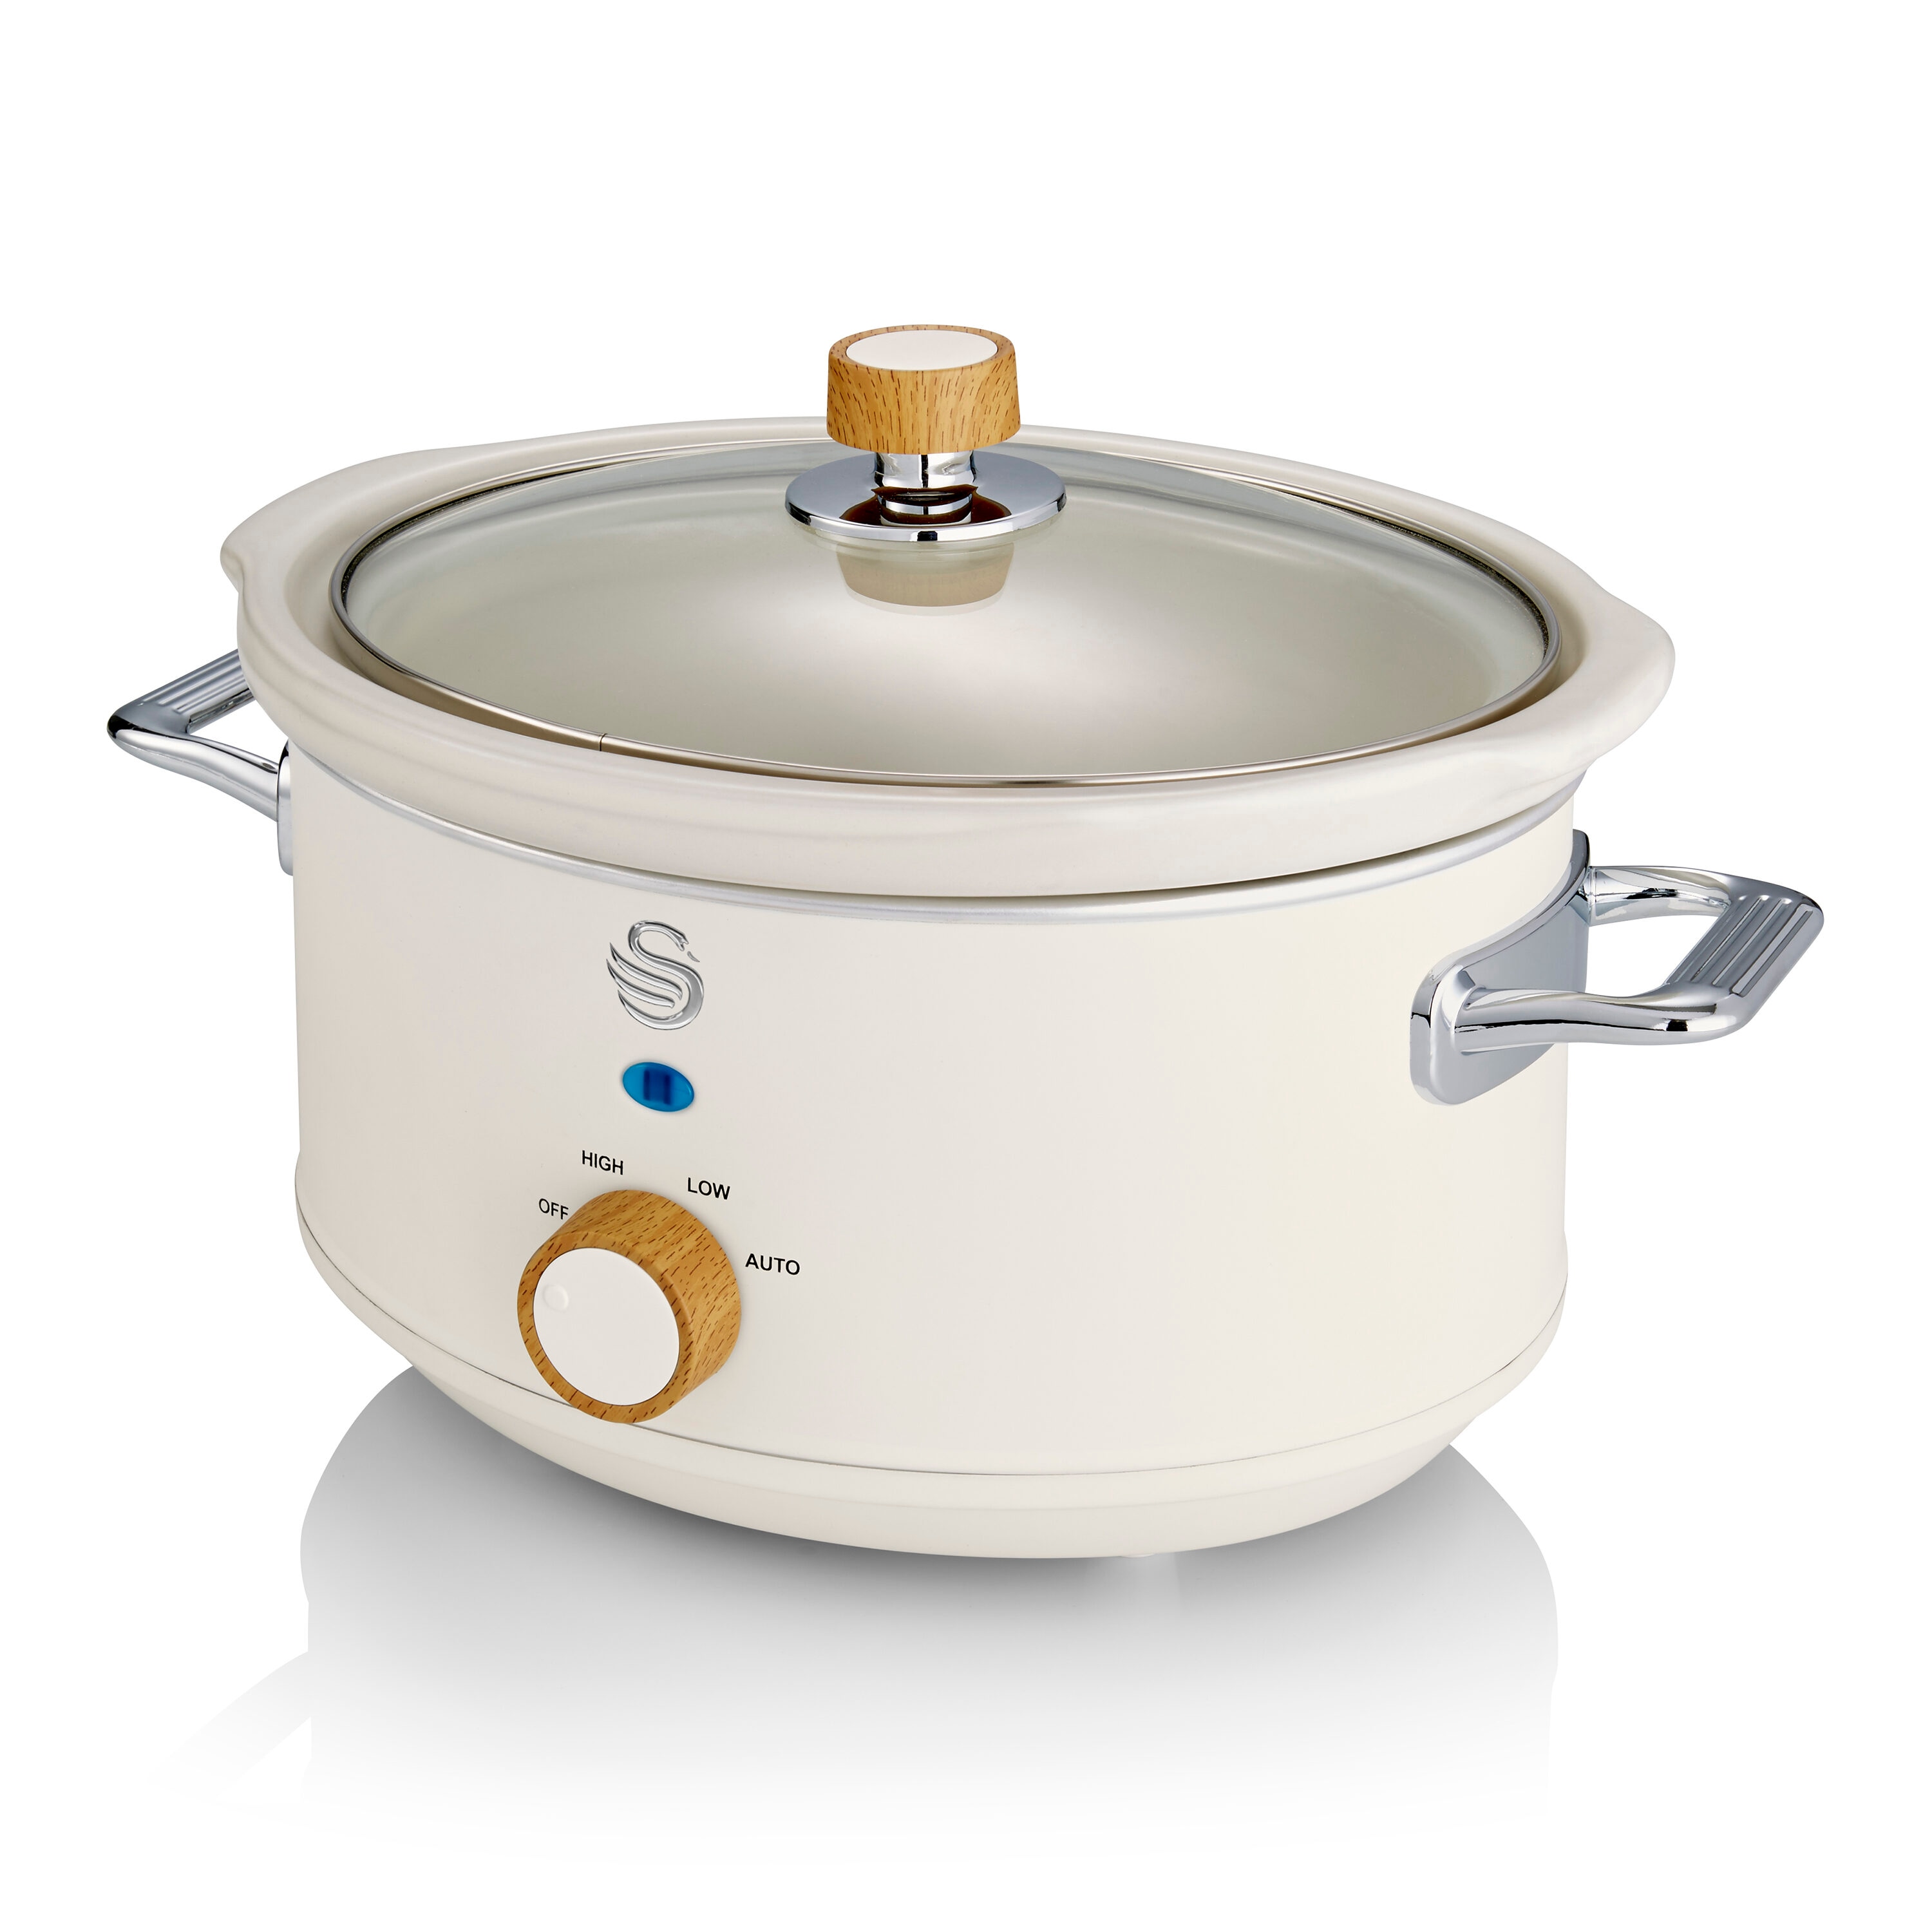 Courant Oval Slow Cooker Crock, with Easy Options 3.5 Quart Dishwasher Safe  Pot, Stainless Steel